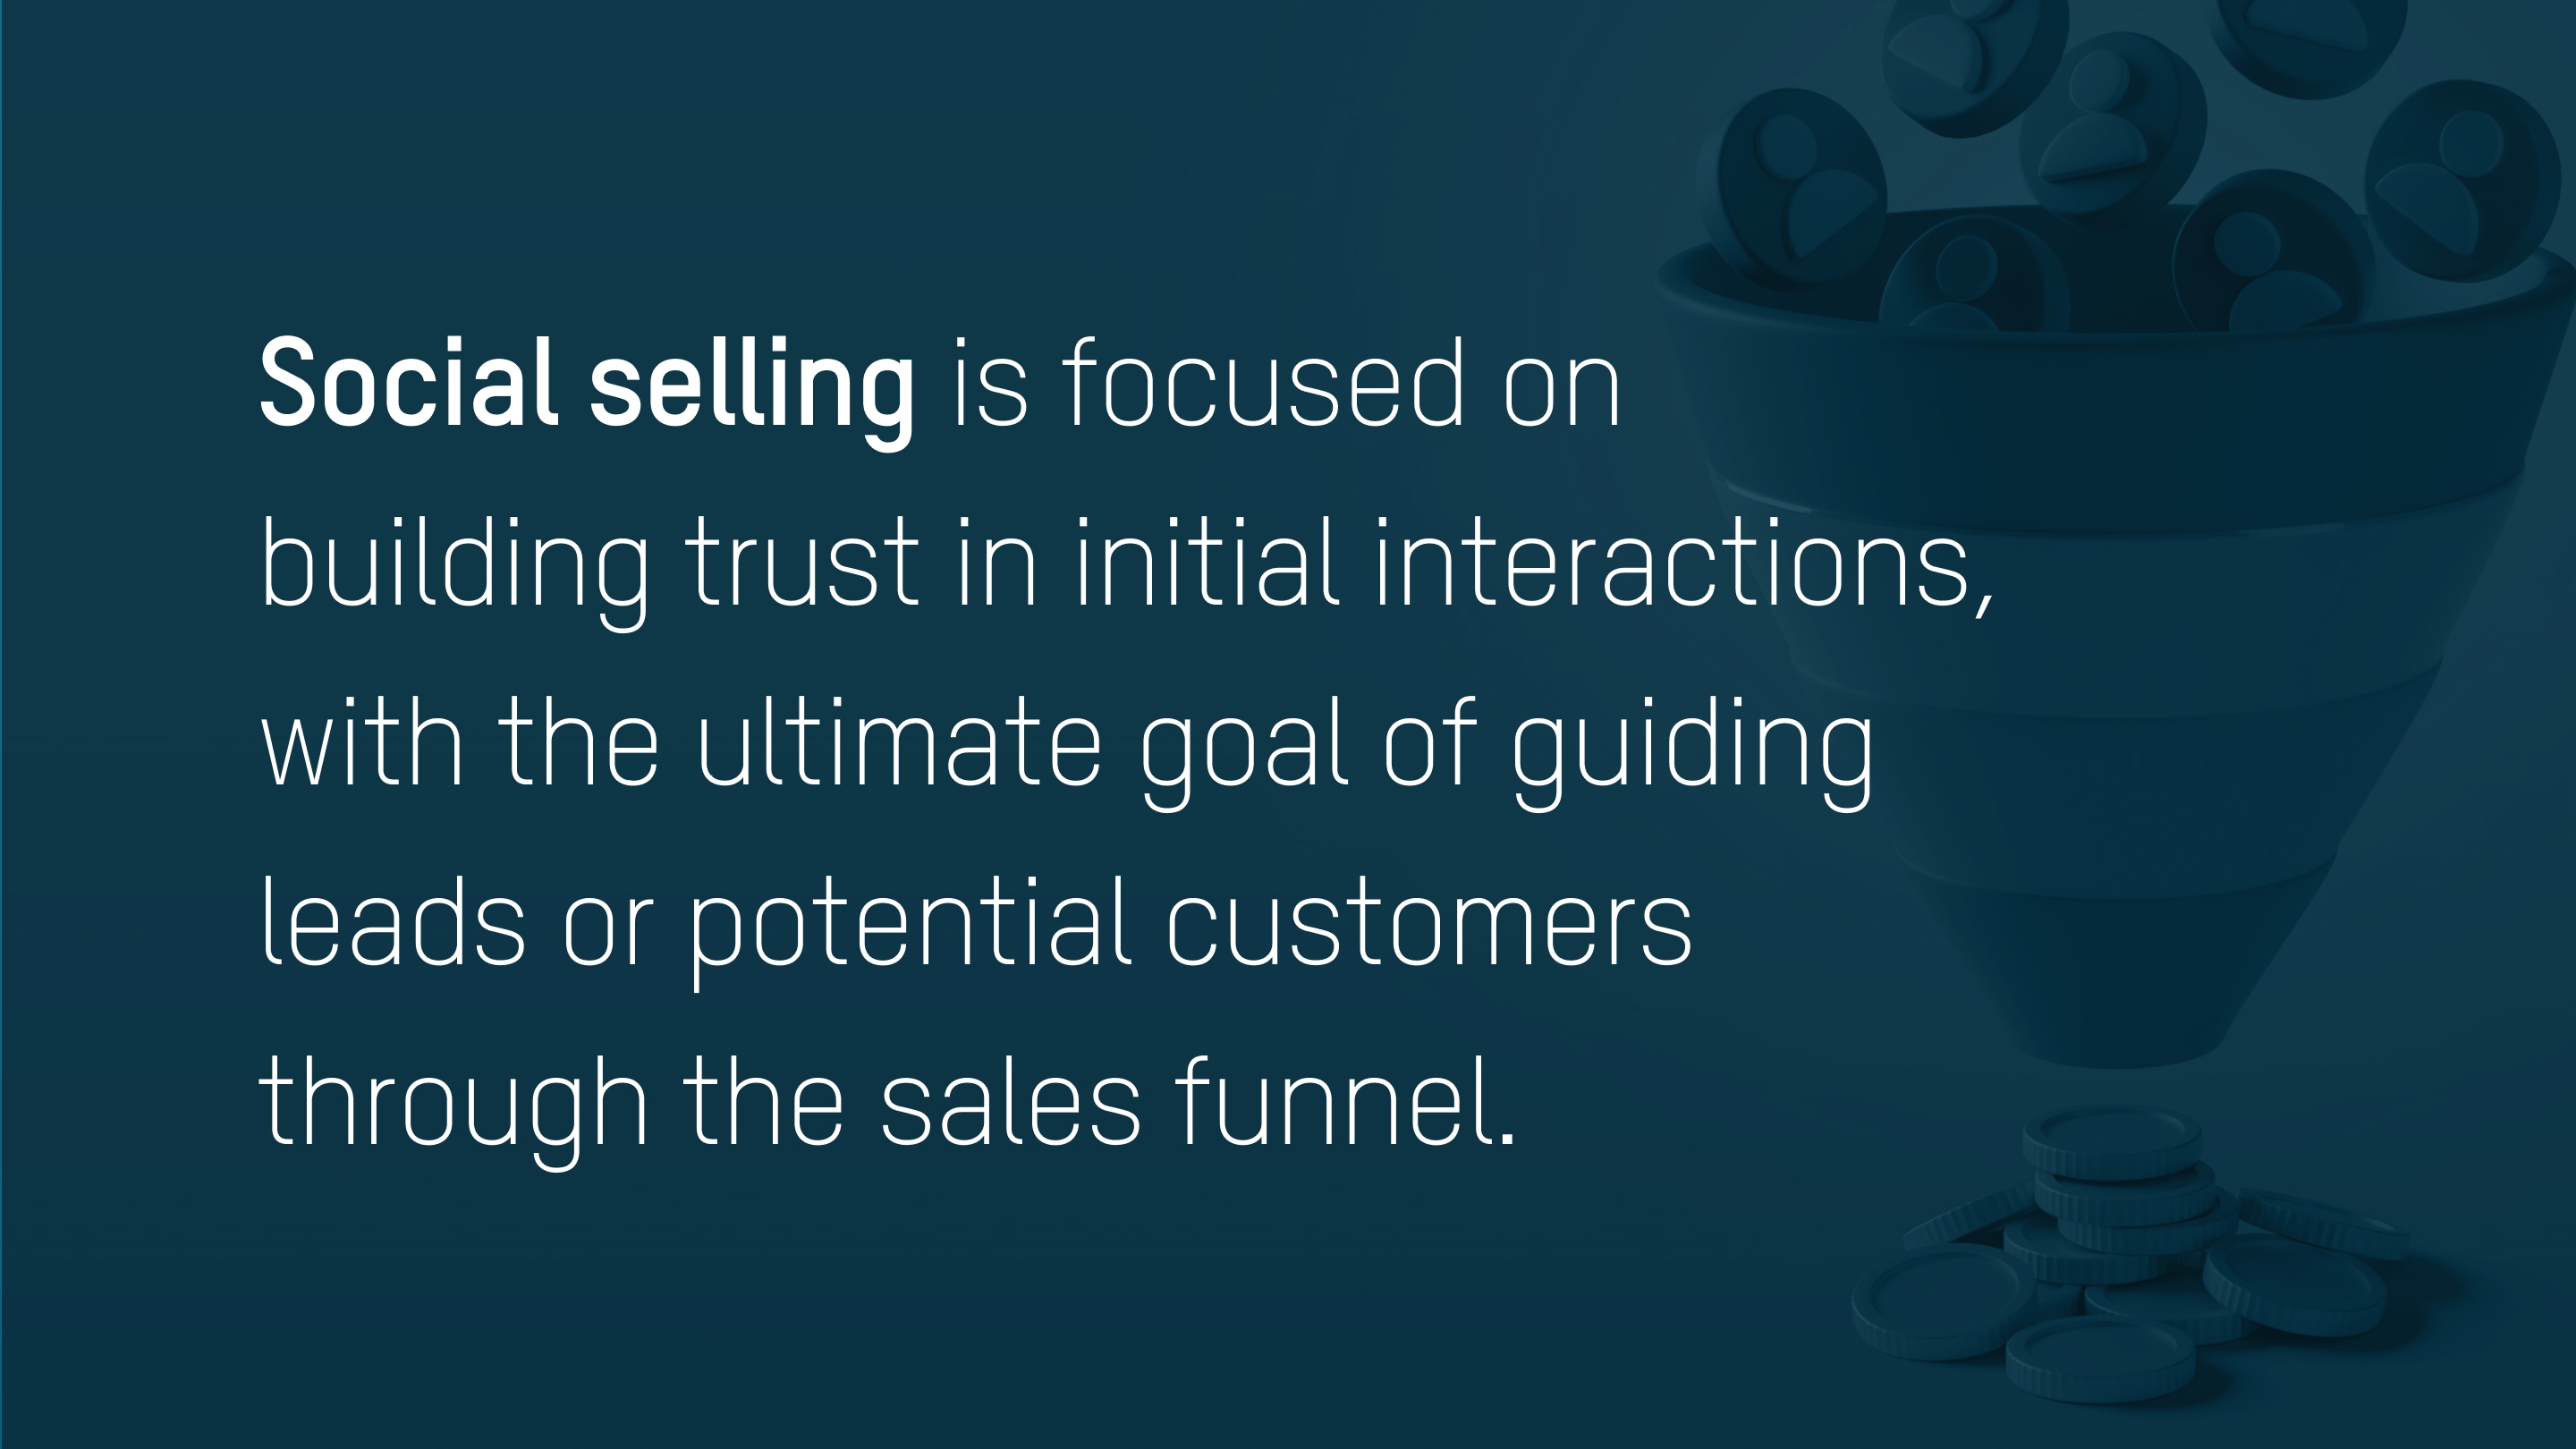 Social selling: Build trust in initial interactions, guide leads through the sales funnel